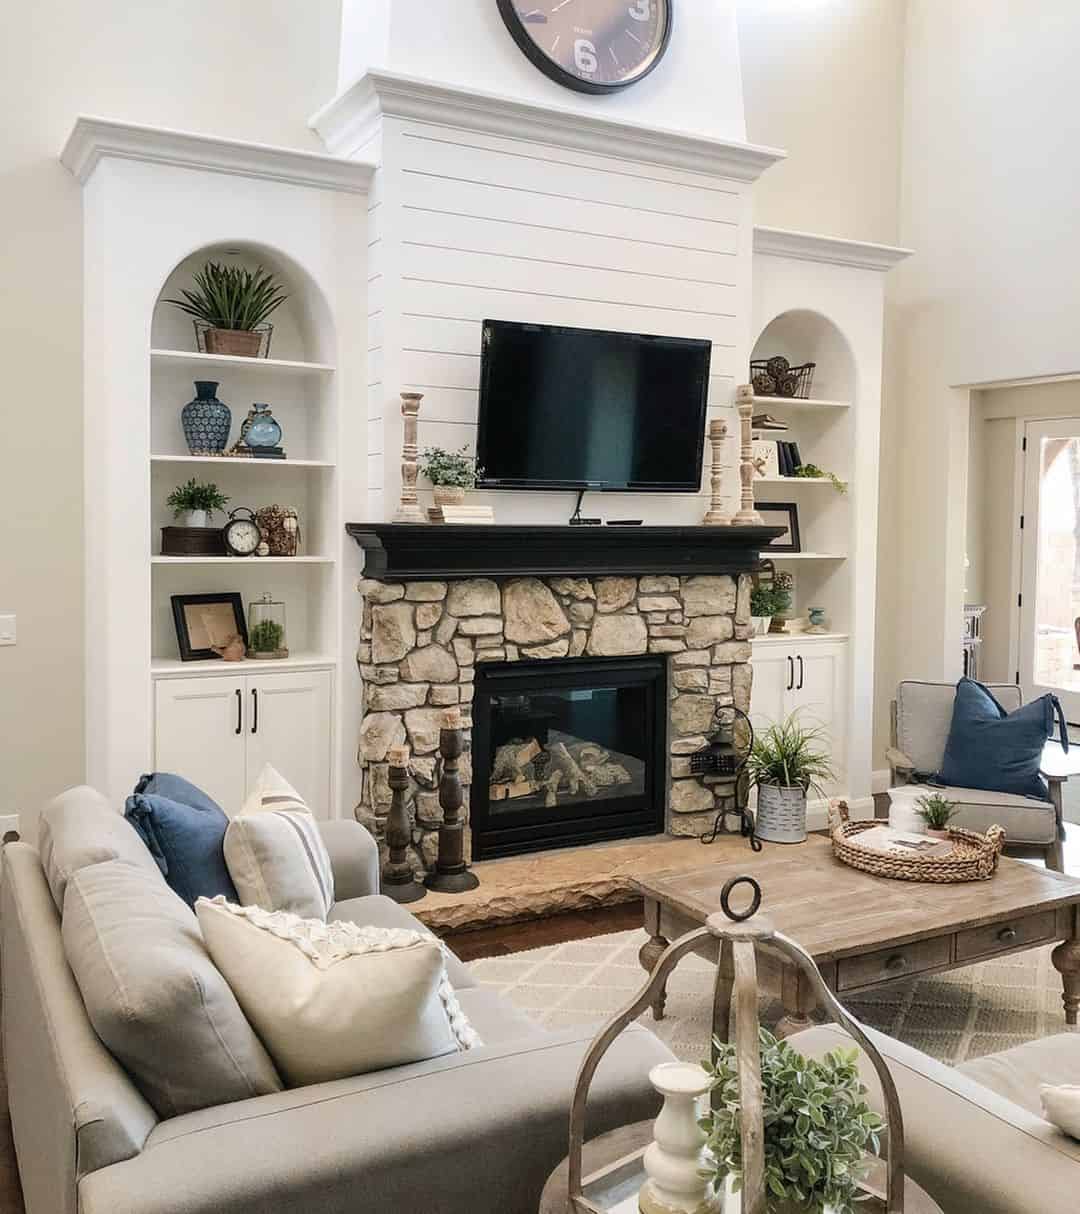 38 Modern Shiplap Fireplace Ideas to Suit Many Different Interior Styles